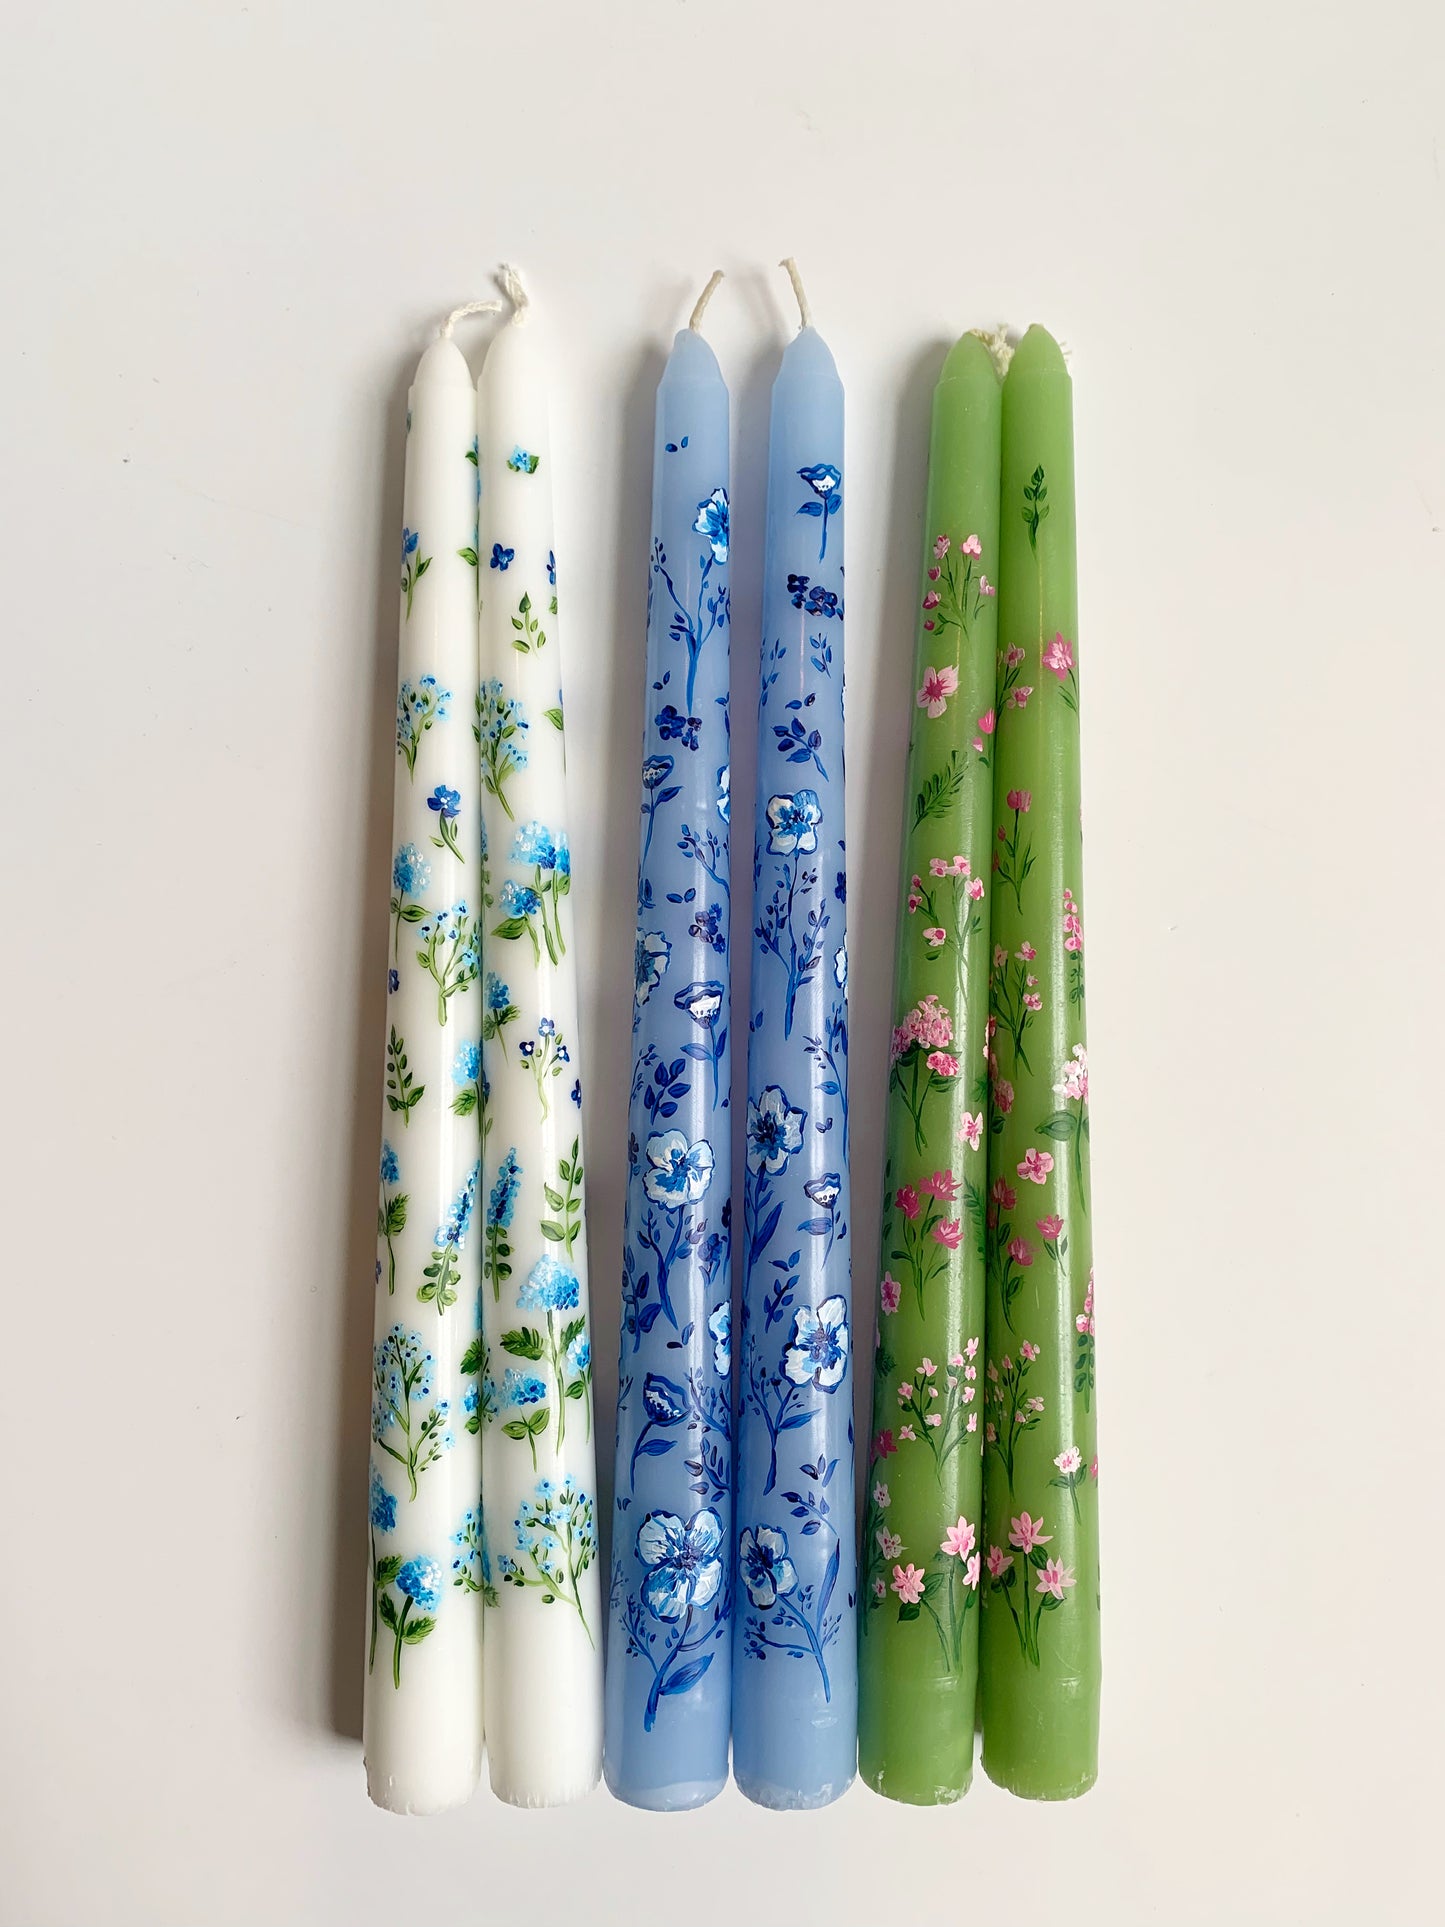 tonal blue floral hand-painted candlesticks